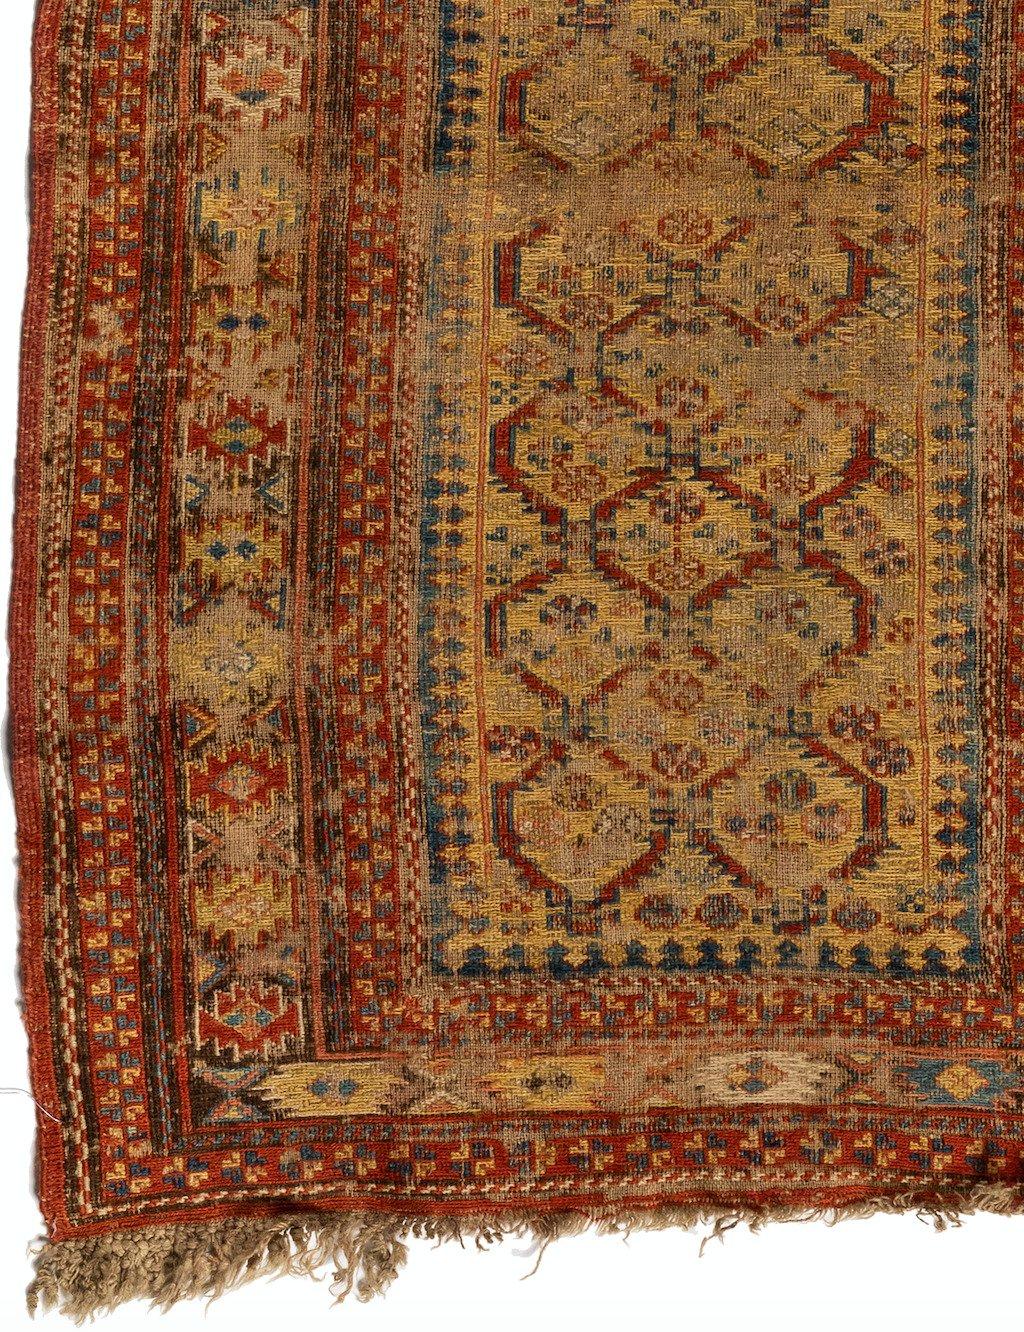 Soumak is a tapestry technique of weaving strong and decorative textiles used as rugs and domestic bags. It is a type of flat-weave, somewhat resembling but stronger and thicker than Kilim, with a smooth front face and a ragged back, where Kilim is